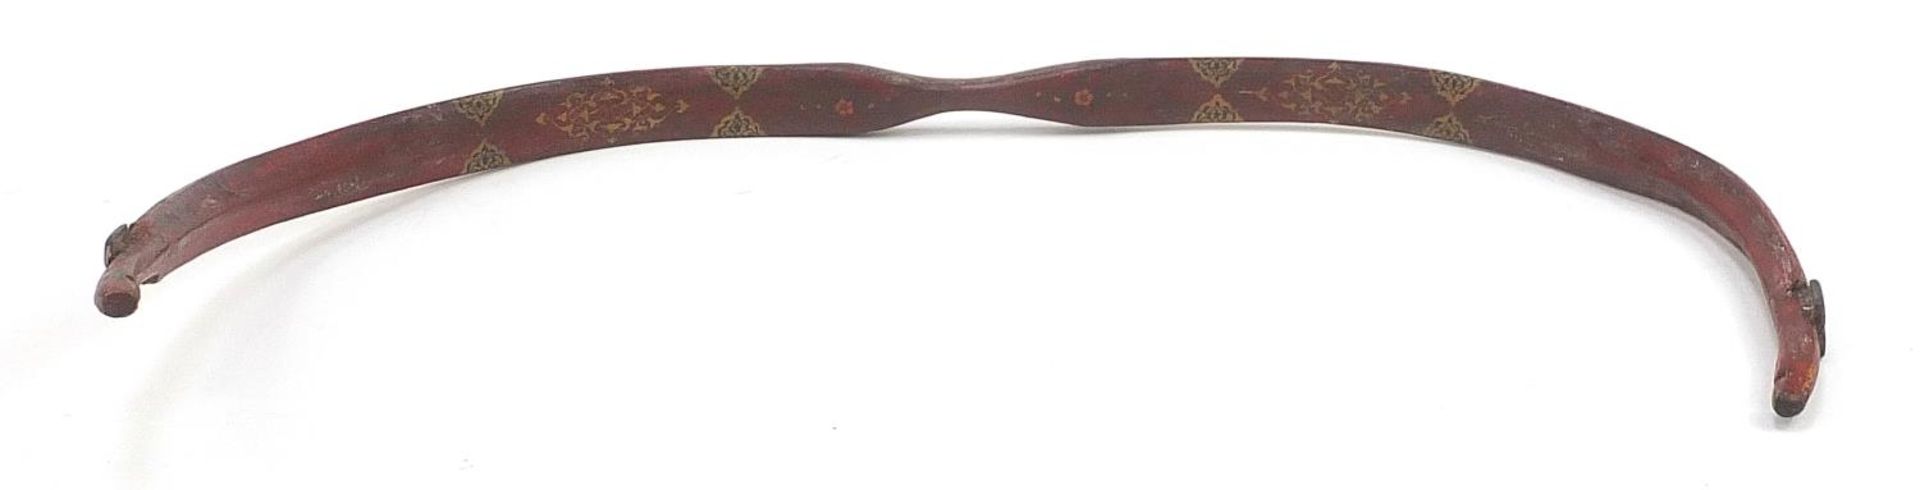 Turkish horn hunting bow hand painted with flowers, 68cm high - Image 2 of 2